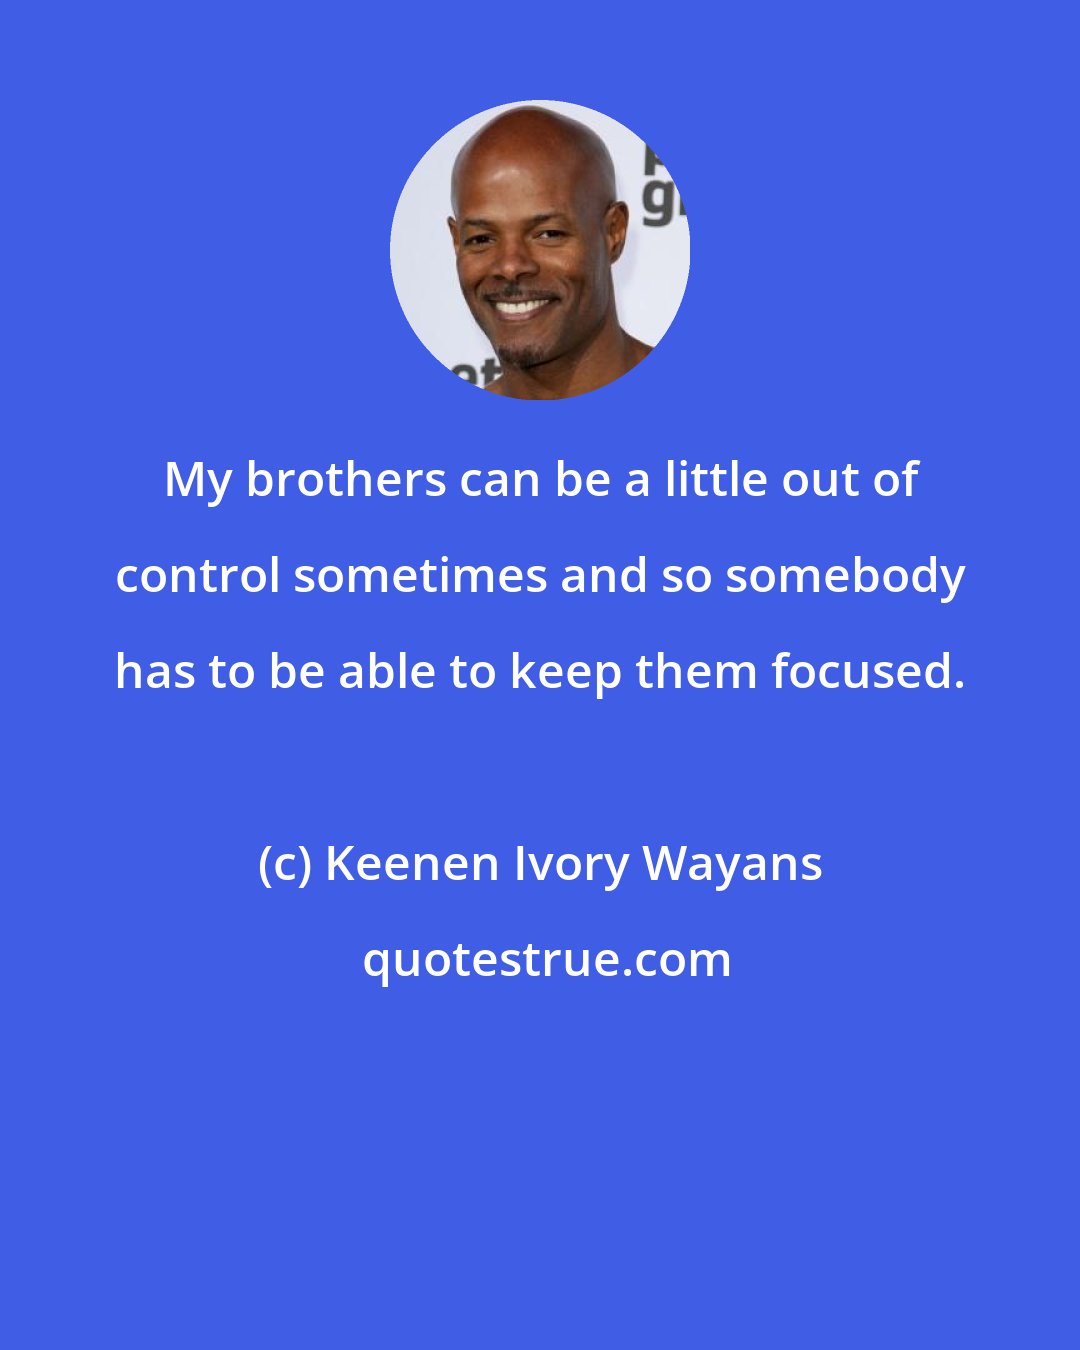 Keenen Ivory Wayans: My brothers can be a little out of control sometimes and so somebody has to be able to keep them focused.